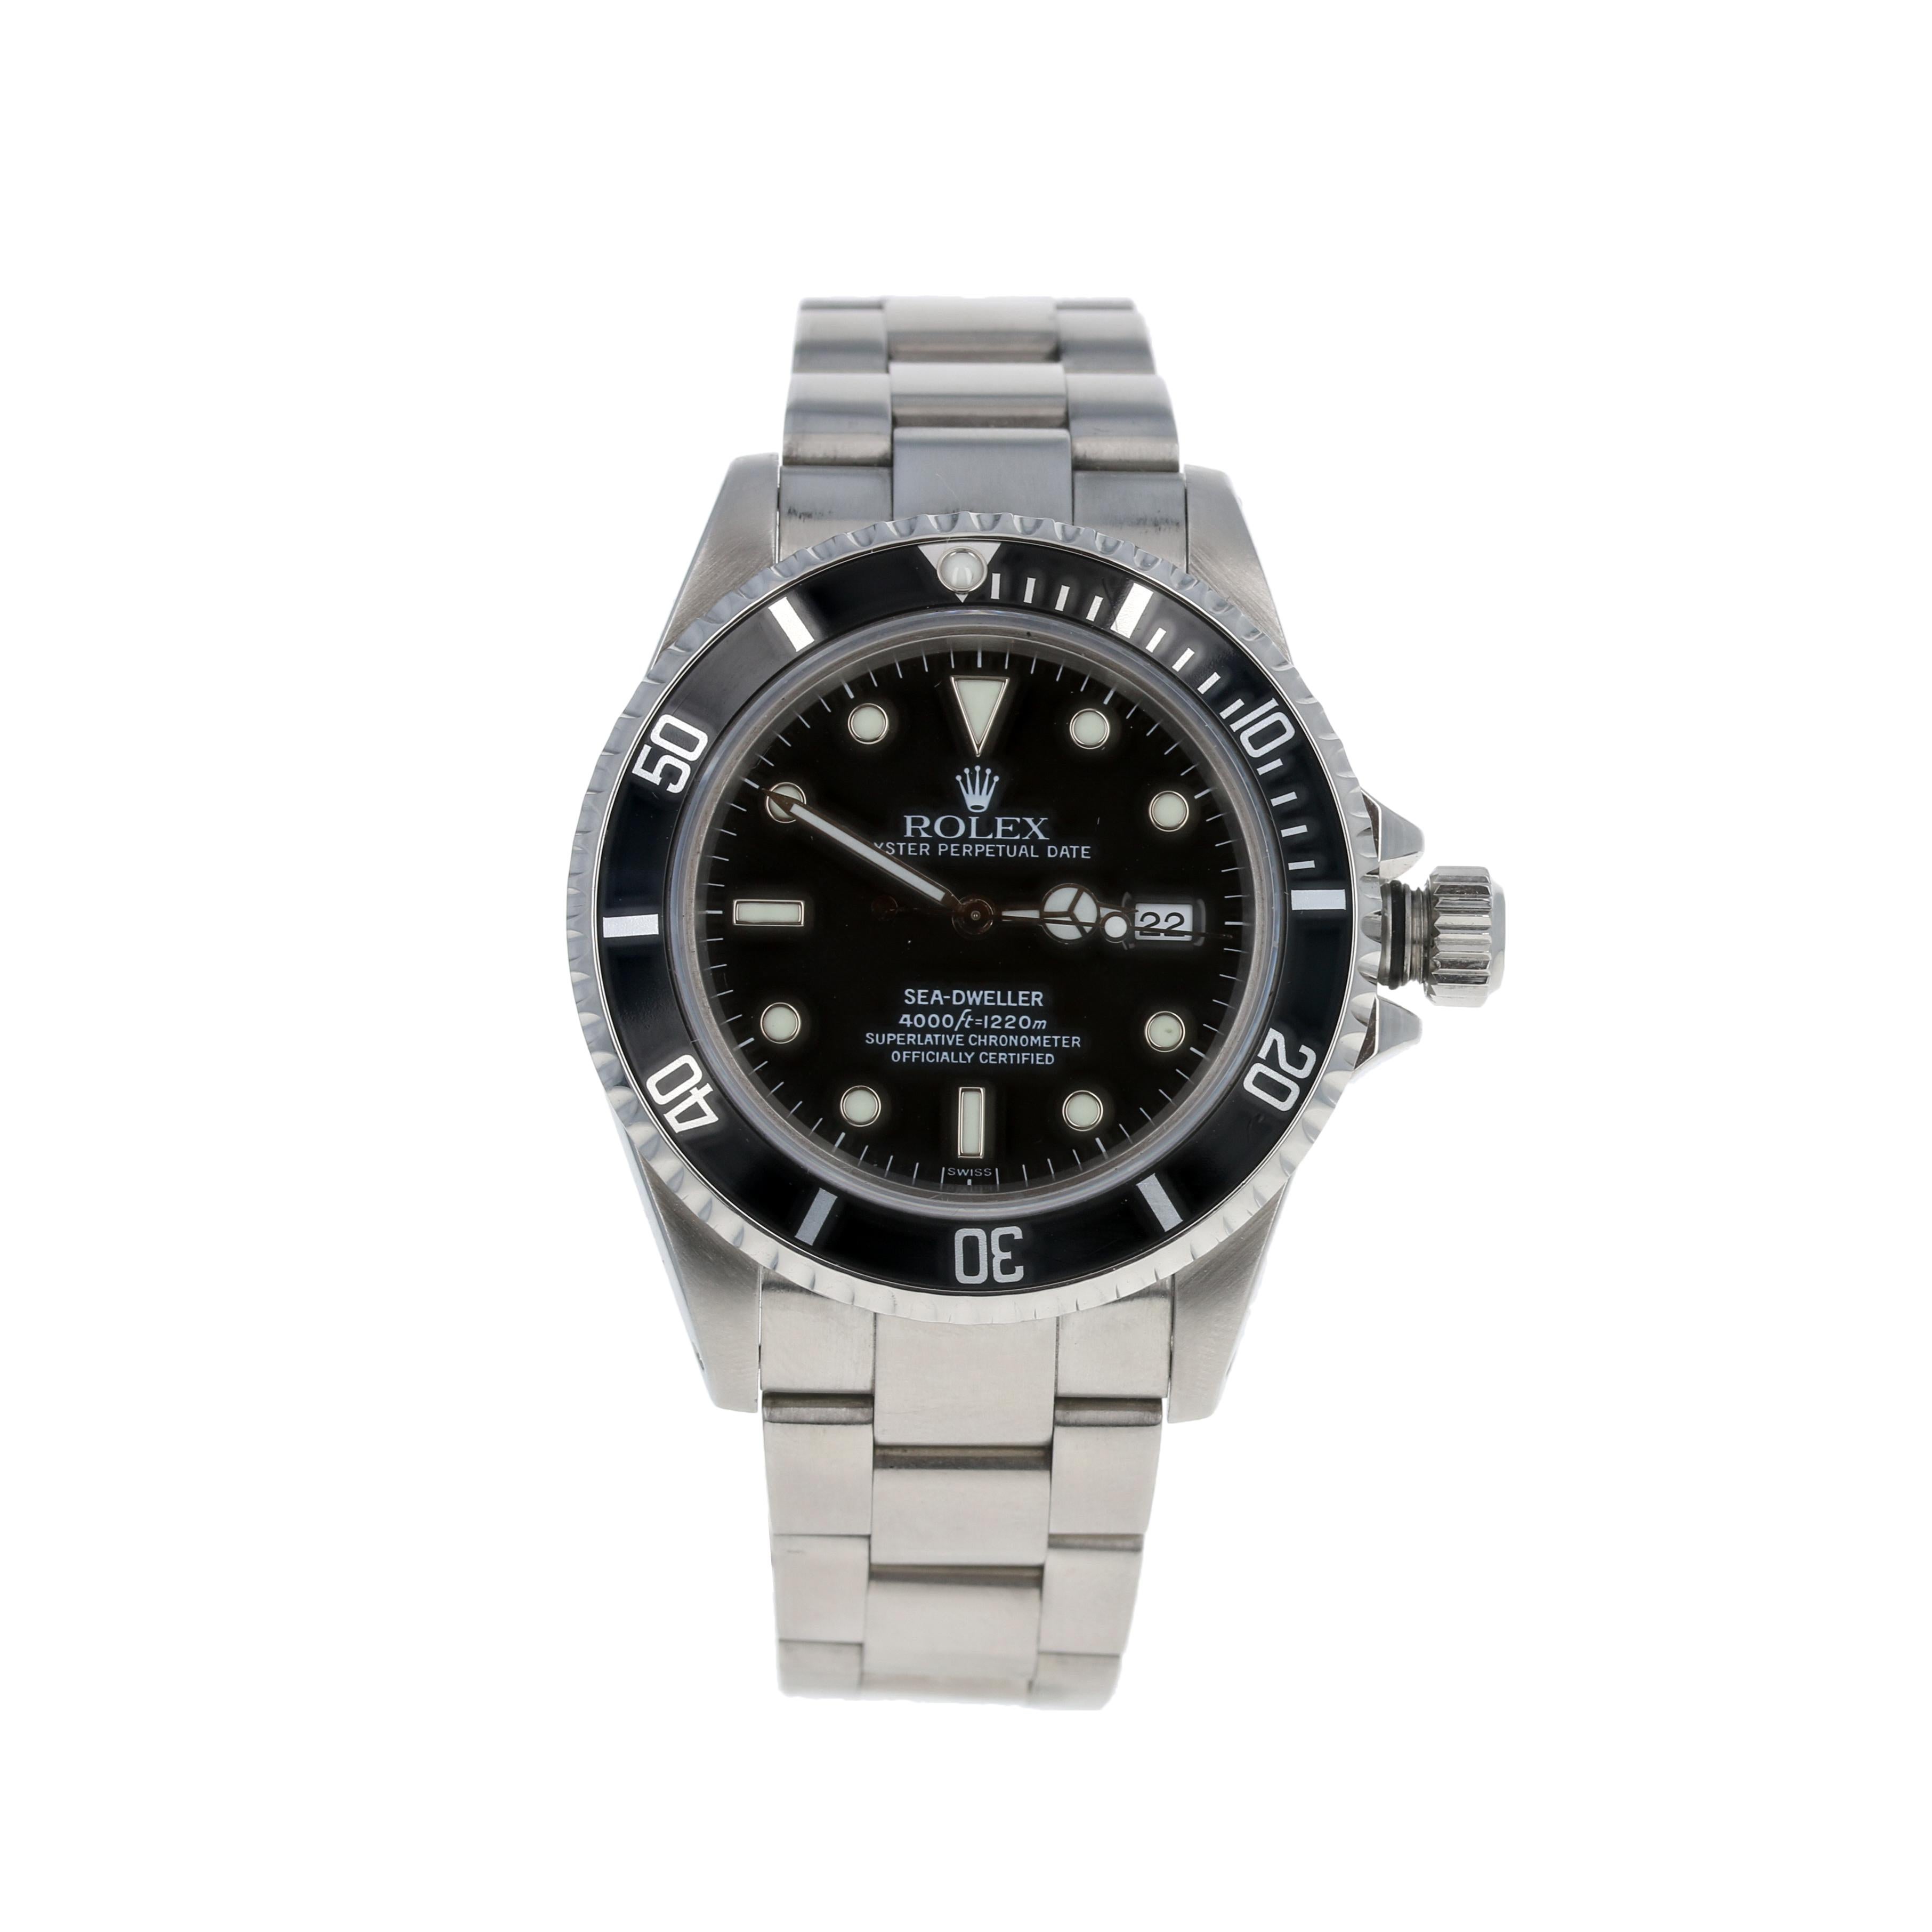 This is an authentic Rolex wristwatch. The watch has been professionally serviced and comes with a two-year warranty. Also accompanying this timepiece are the Rolex boxes and papers, a Rolex cleaning cloth, and the Rolex 4000 anchor. 

Brand: Rolex